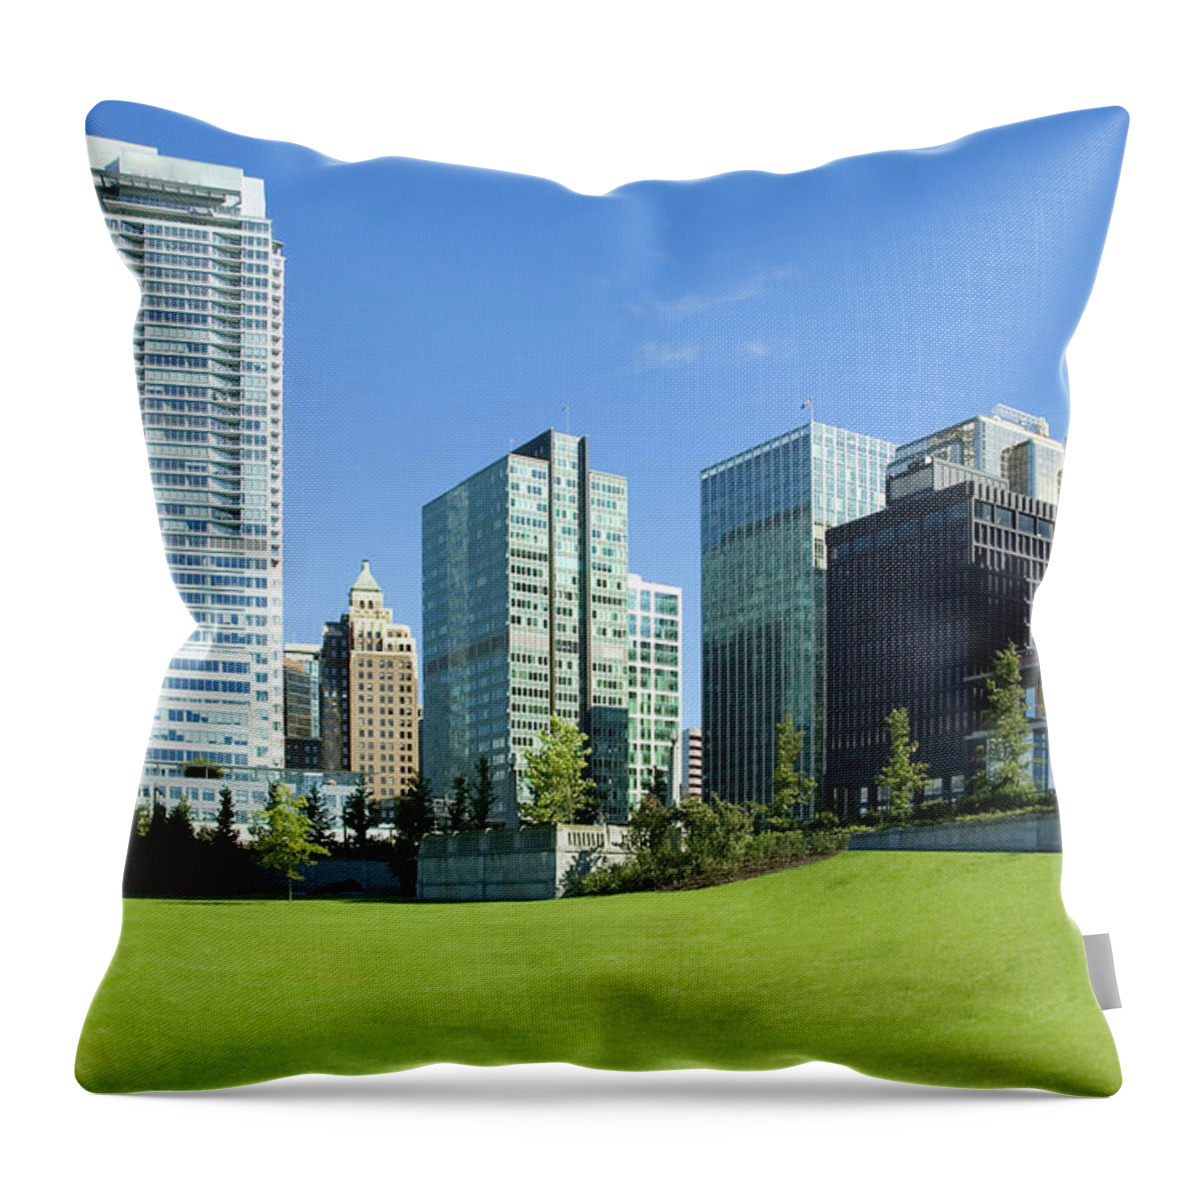 Environmental Conservation Throw Pillow featuring the photograph City Of The Future 2 by Rontech2000